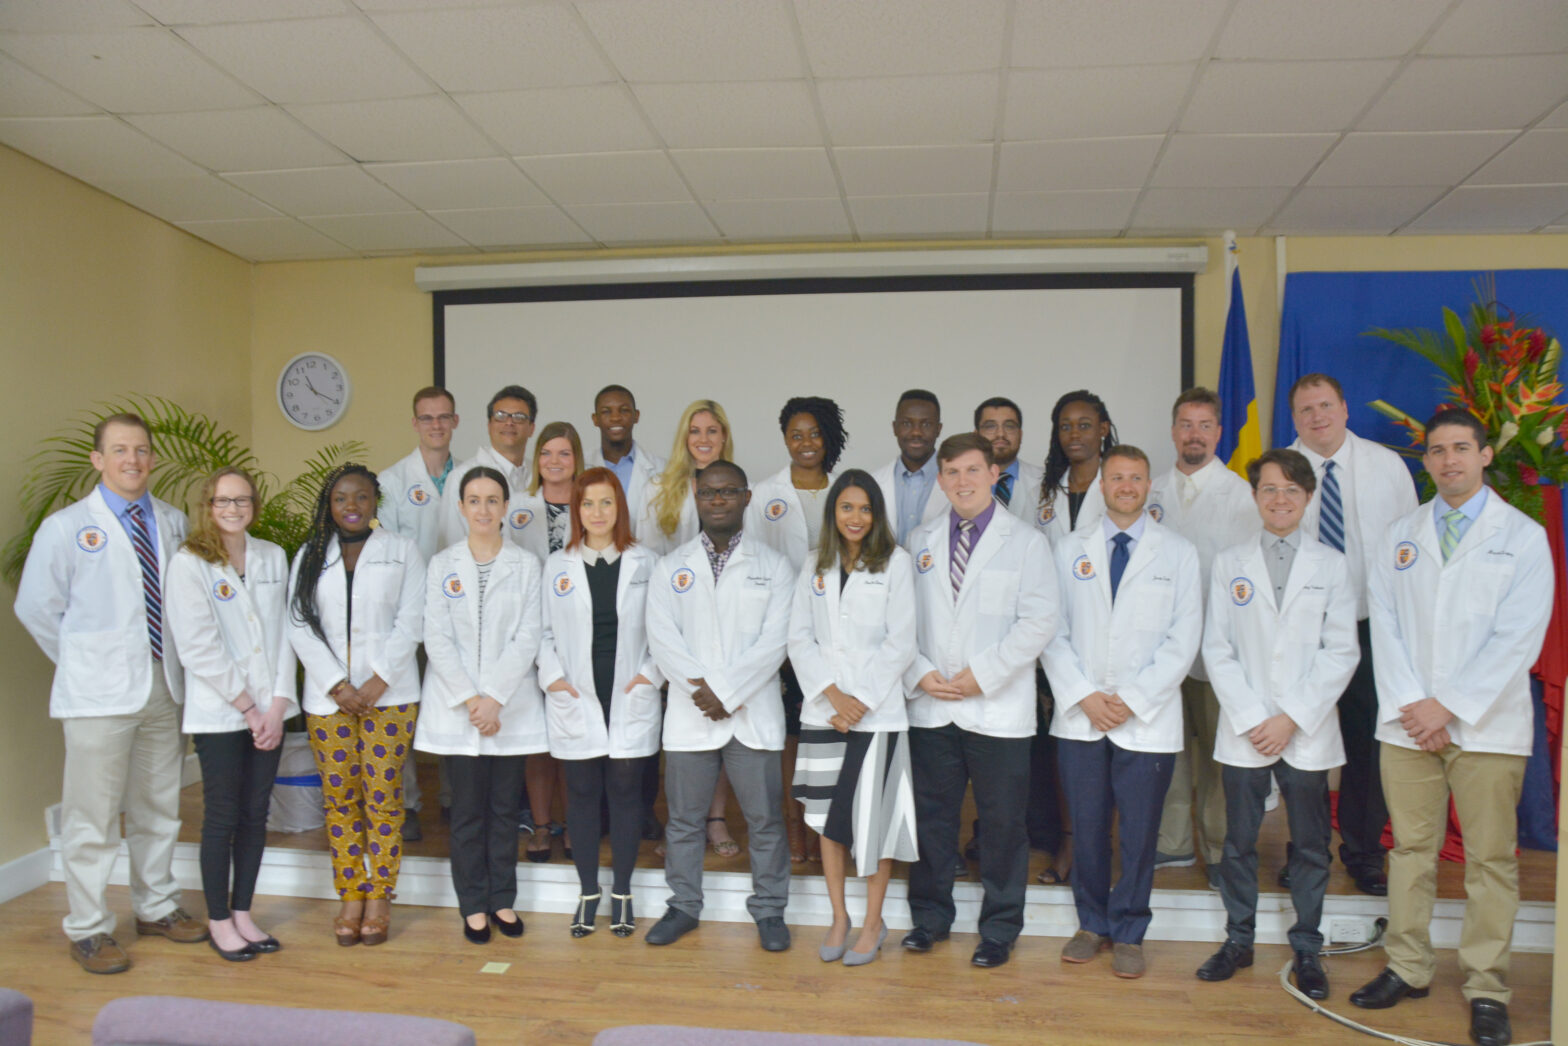 Group photo of new caribbean medical students